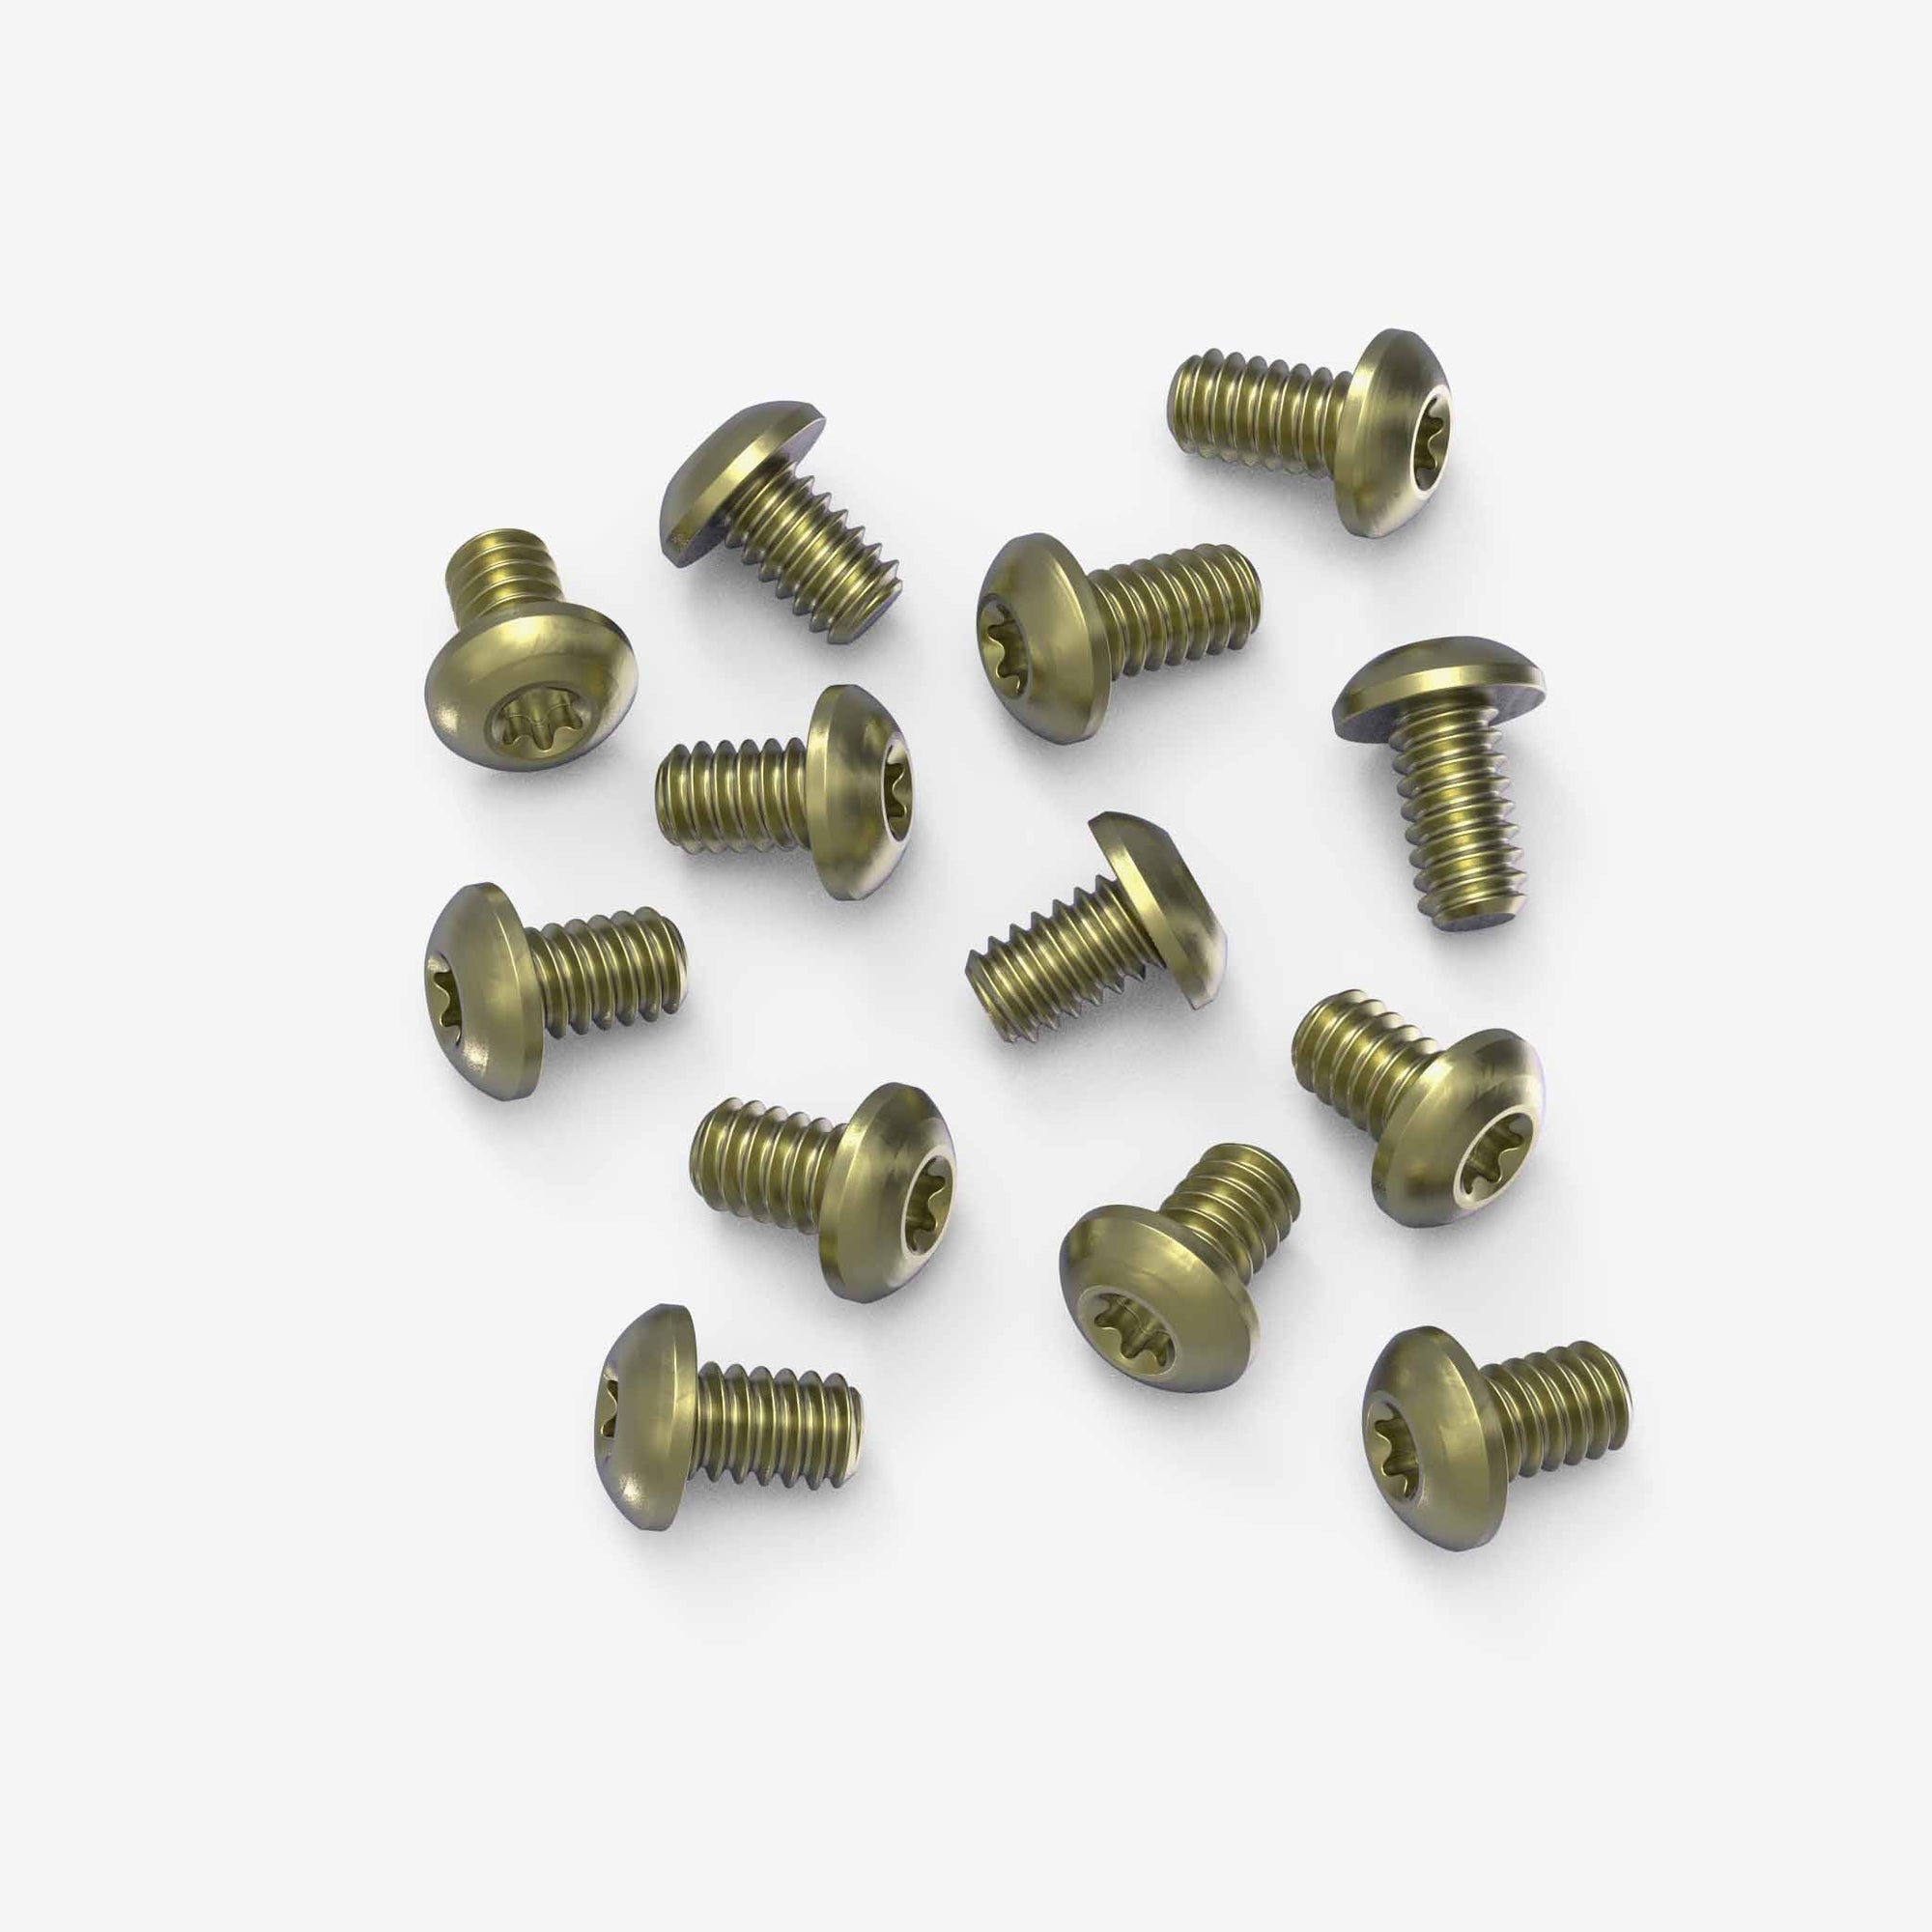 Set of 13 Titanium Body Screws for Benchmade Taggedout-Gold Anodize